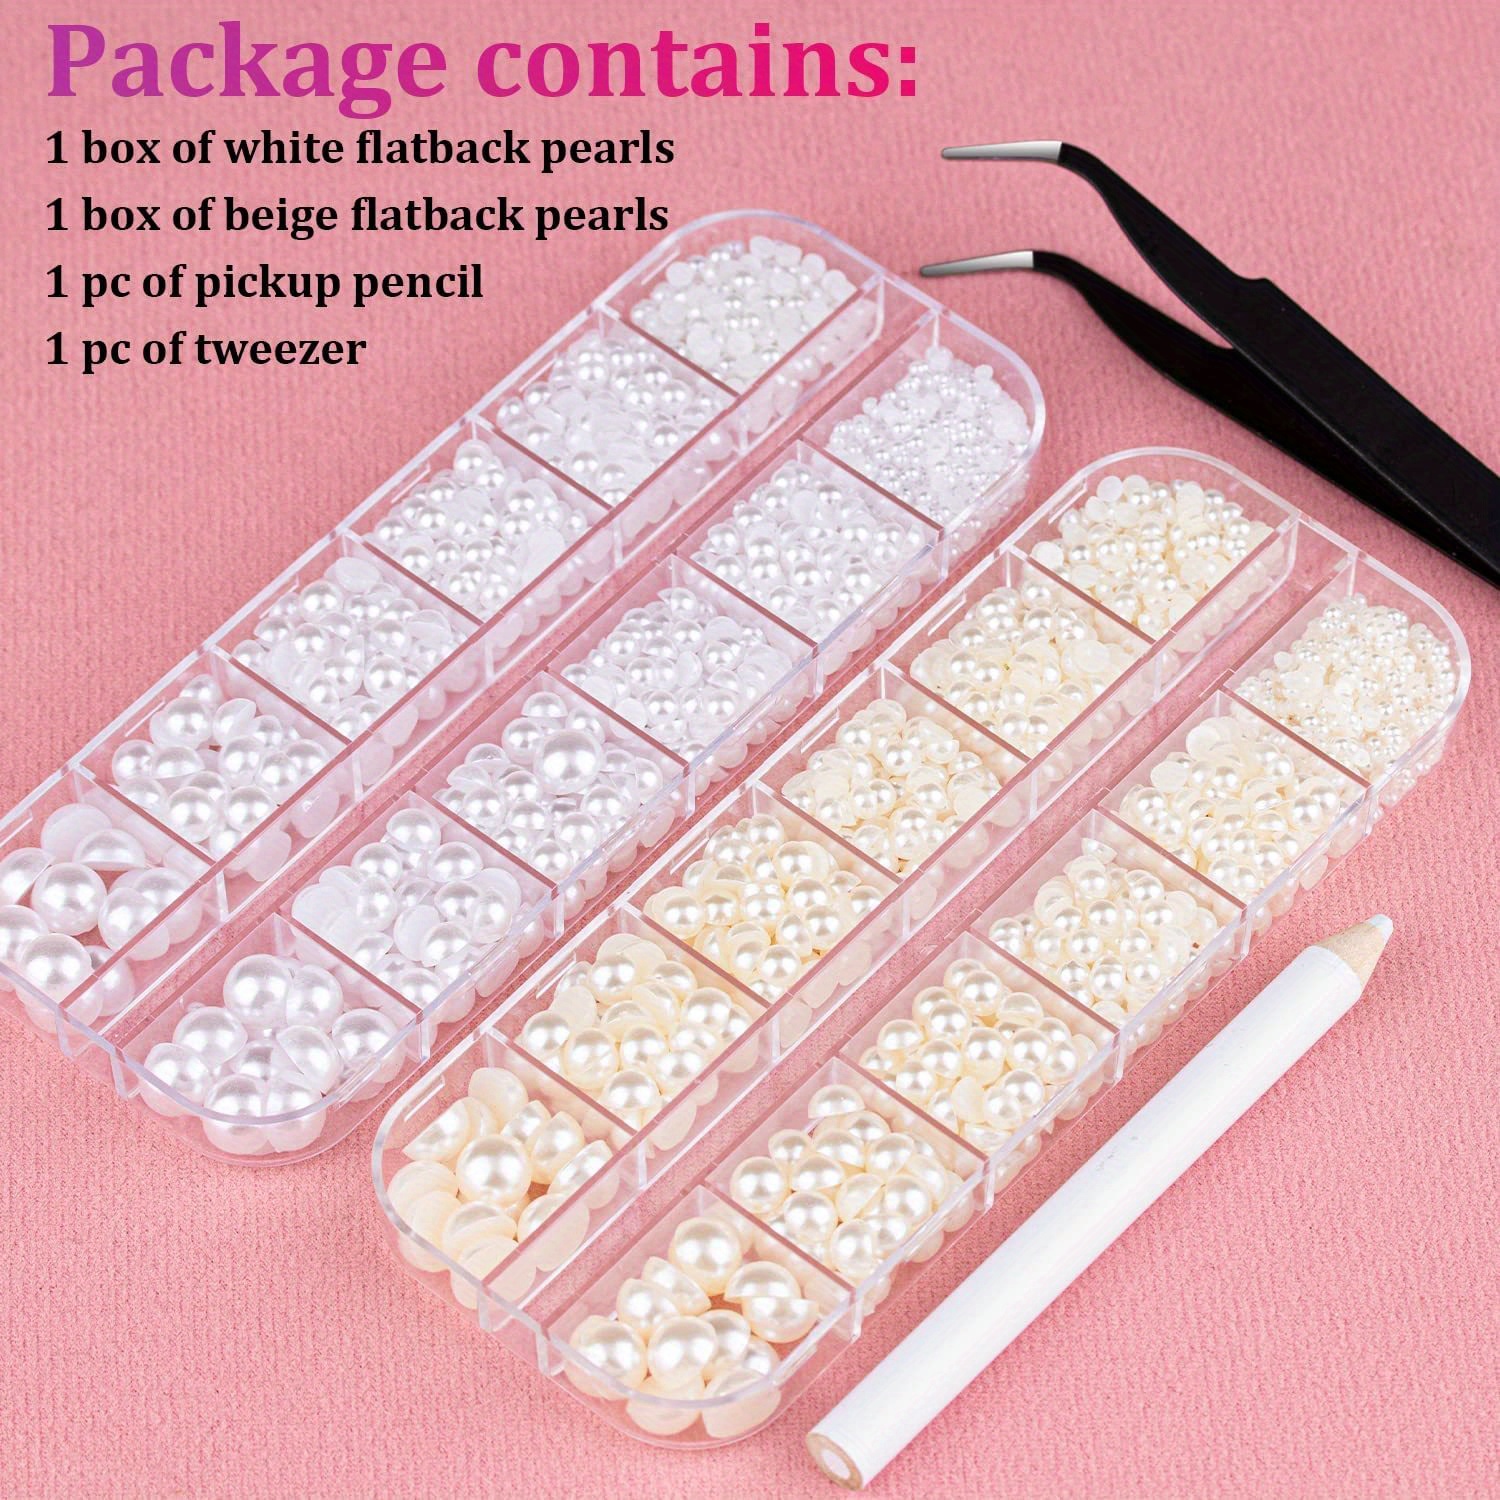  3 Boxes Flat Back Pearls Kit 5 Flatback Pink Half Round Pearls  3-10mm with Pickup Pencil and Tweezer for Home DIY and Professional Nail  Art, Face Makeup and Craft : Beauty